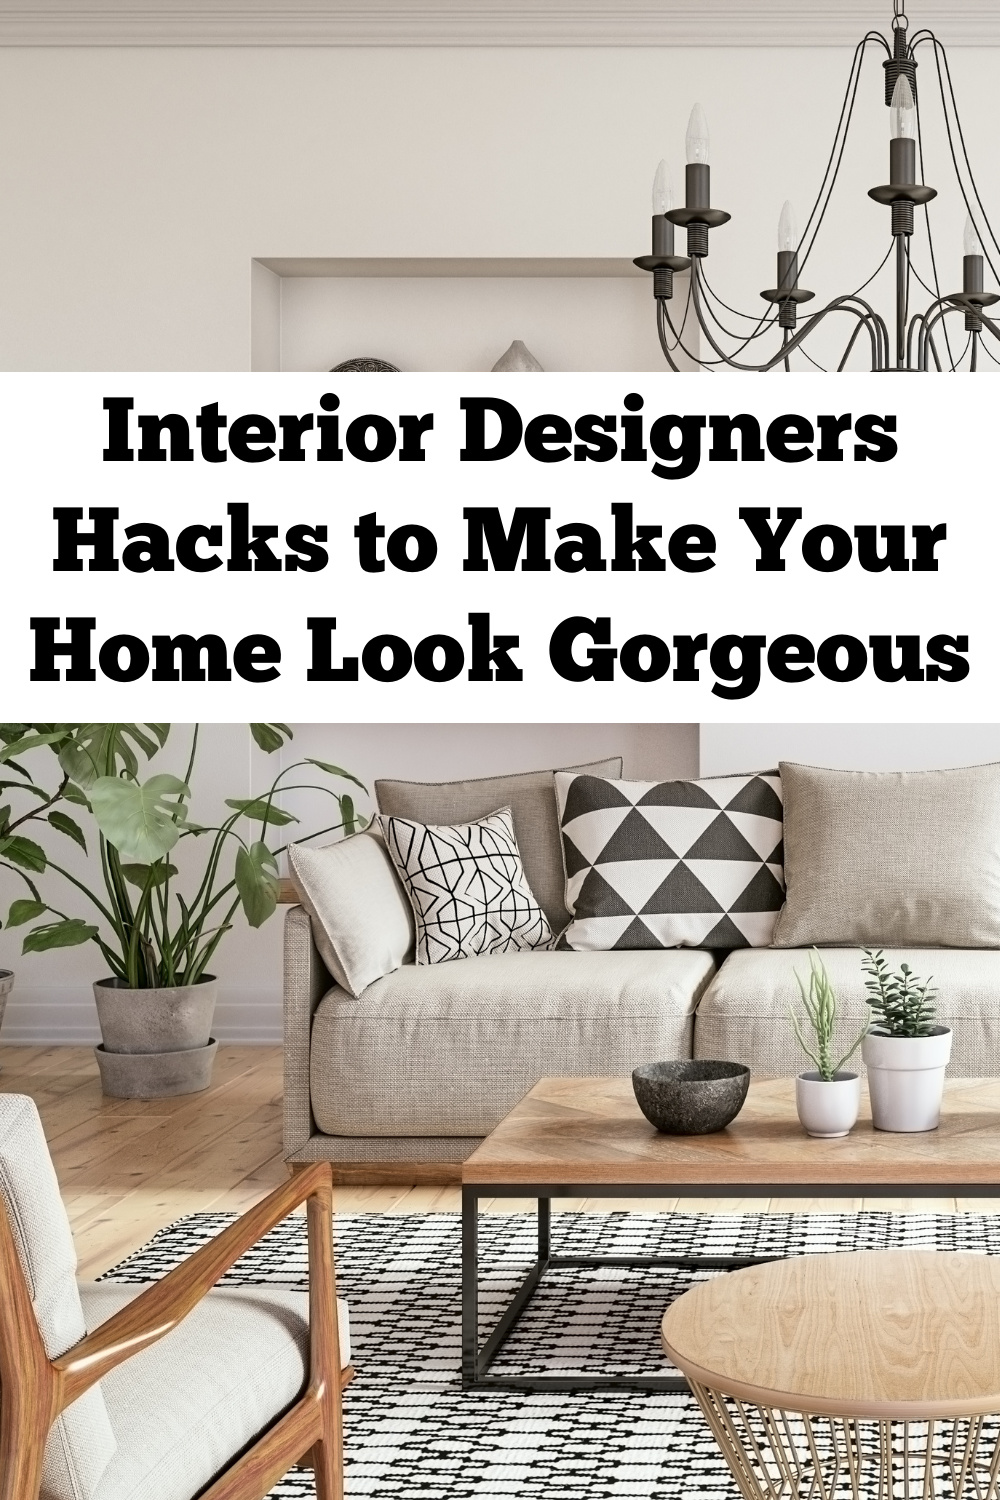  Interior Designers Hacks to Make Your Home Look Gorgeous.